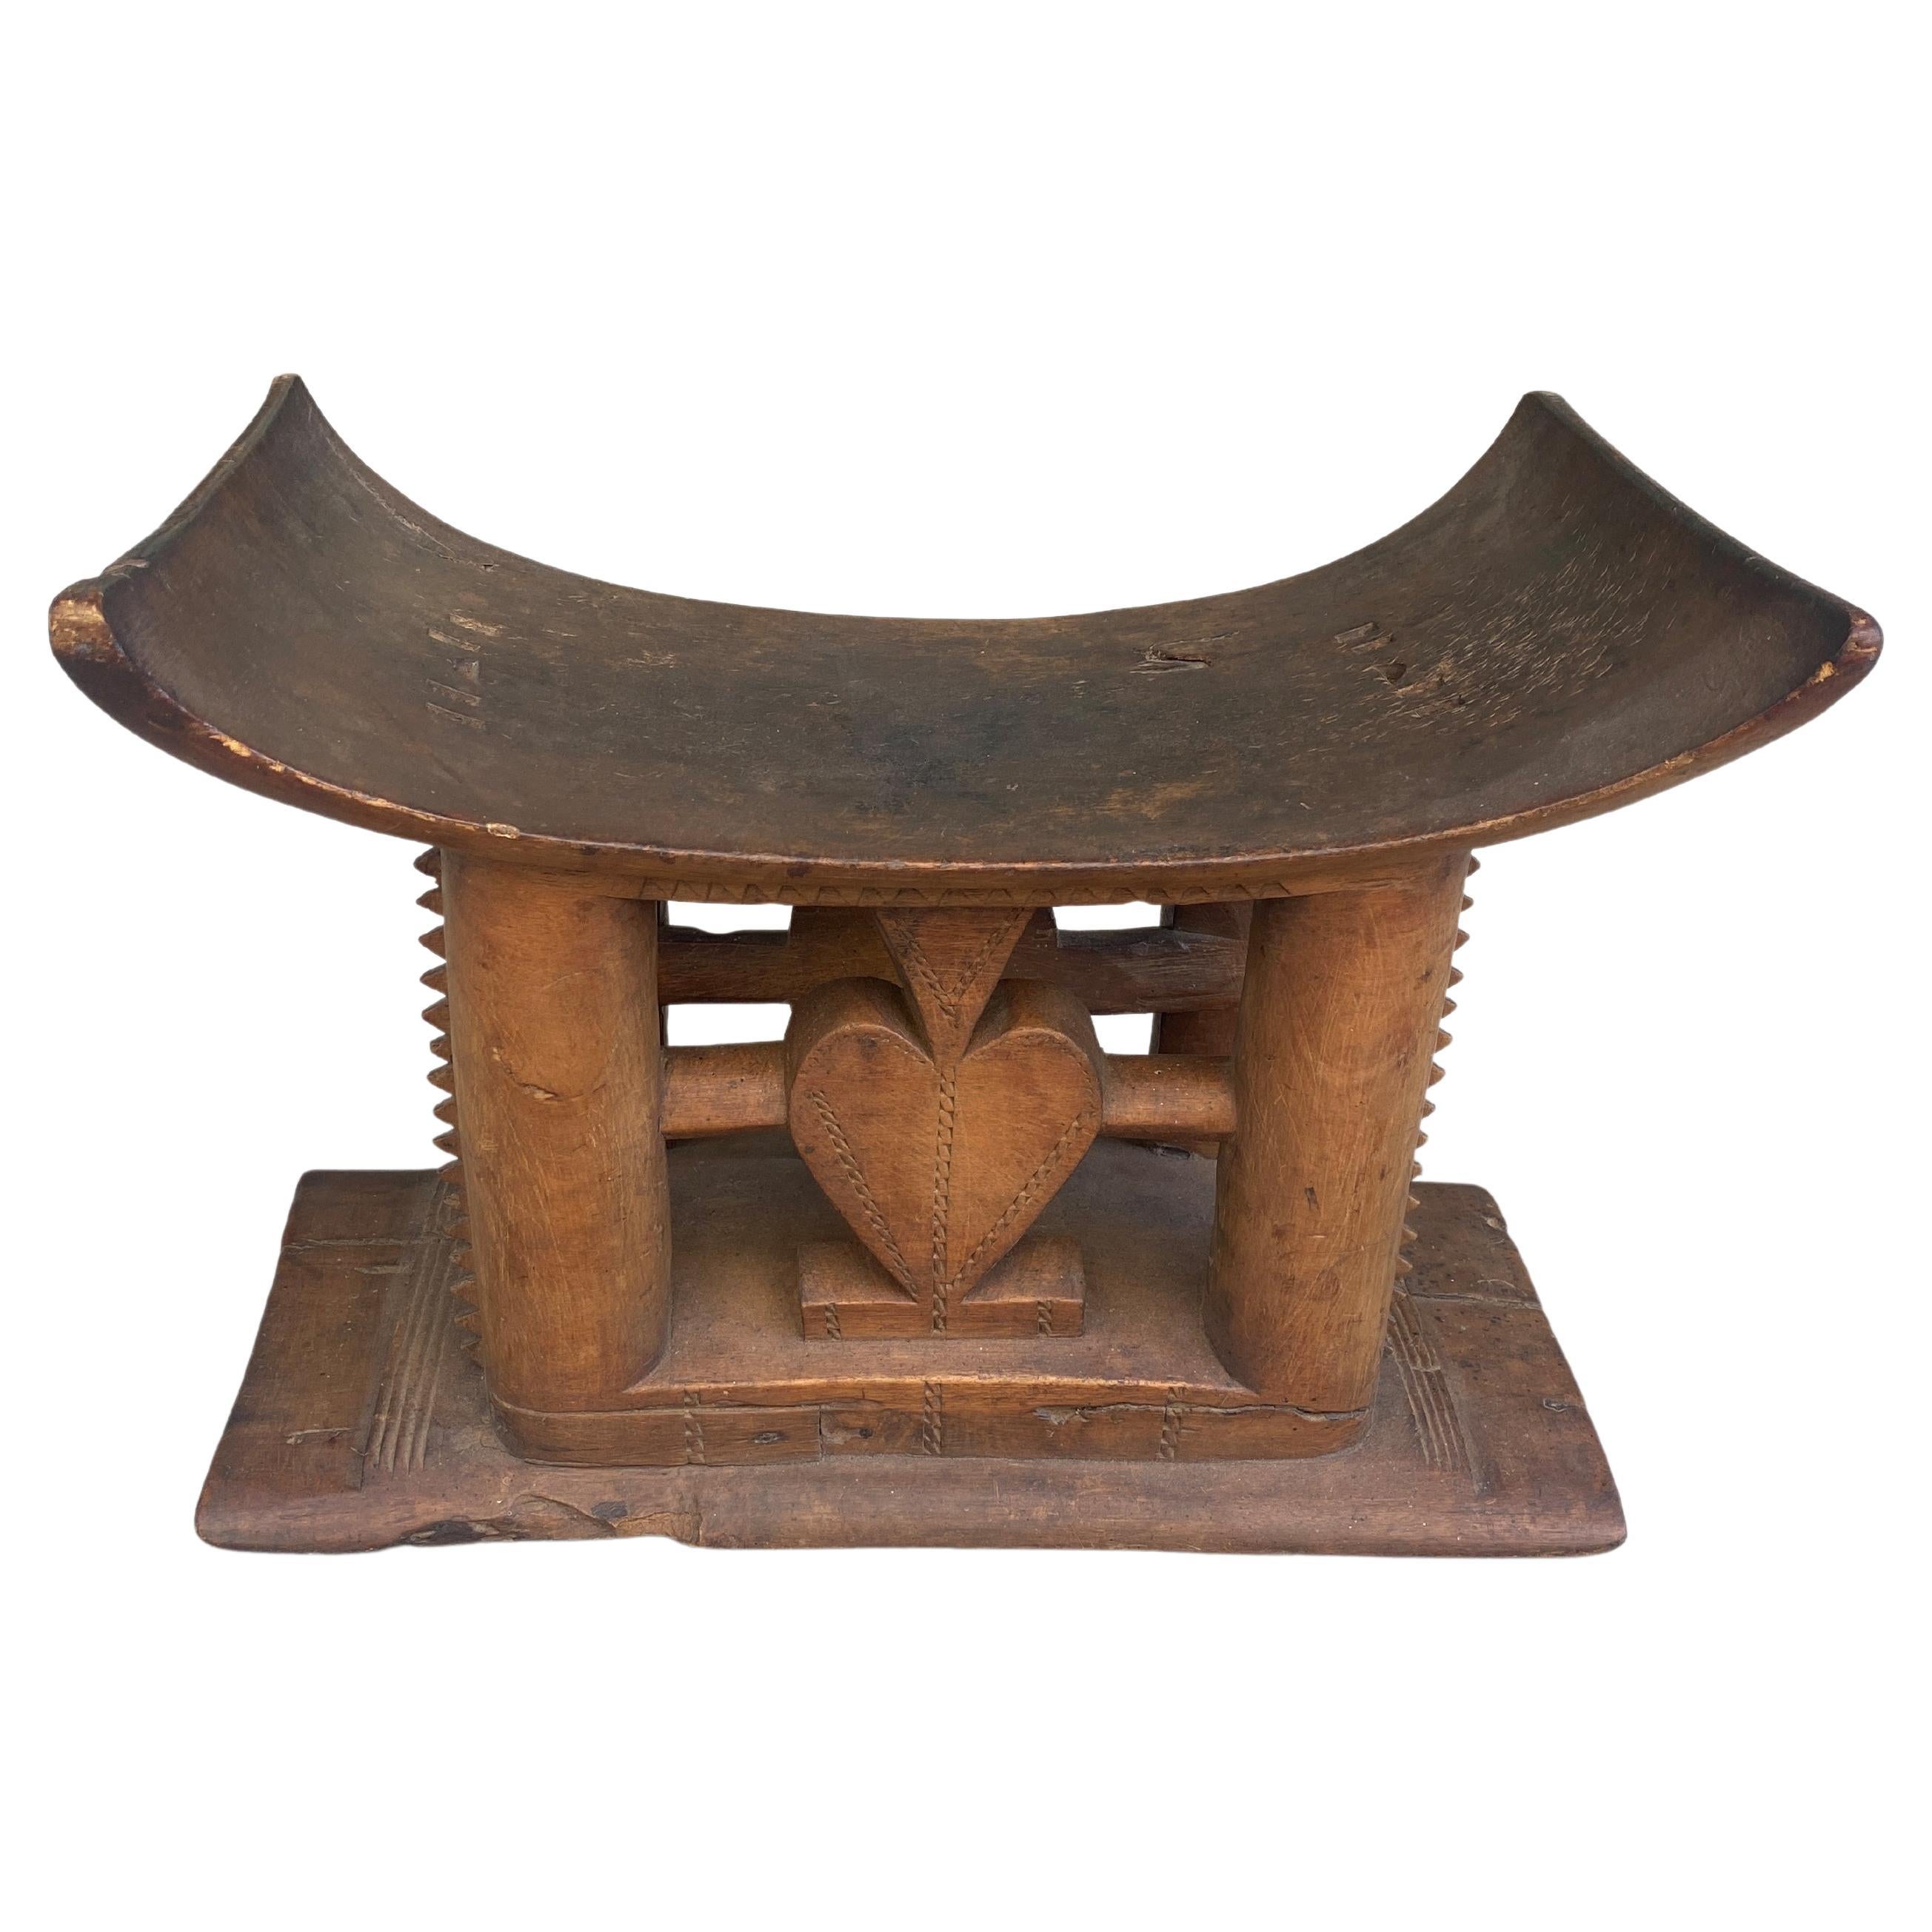 Andrianna Shamaris Antique Ashanti Stool with a Hand Carved Heart